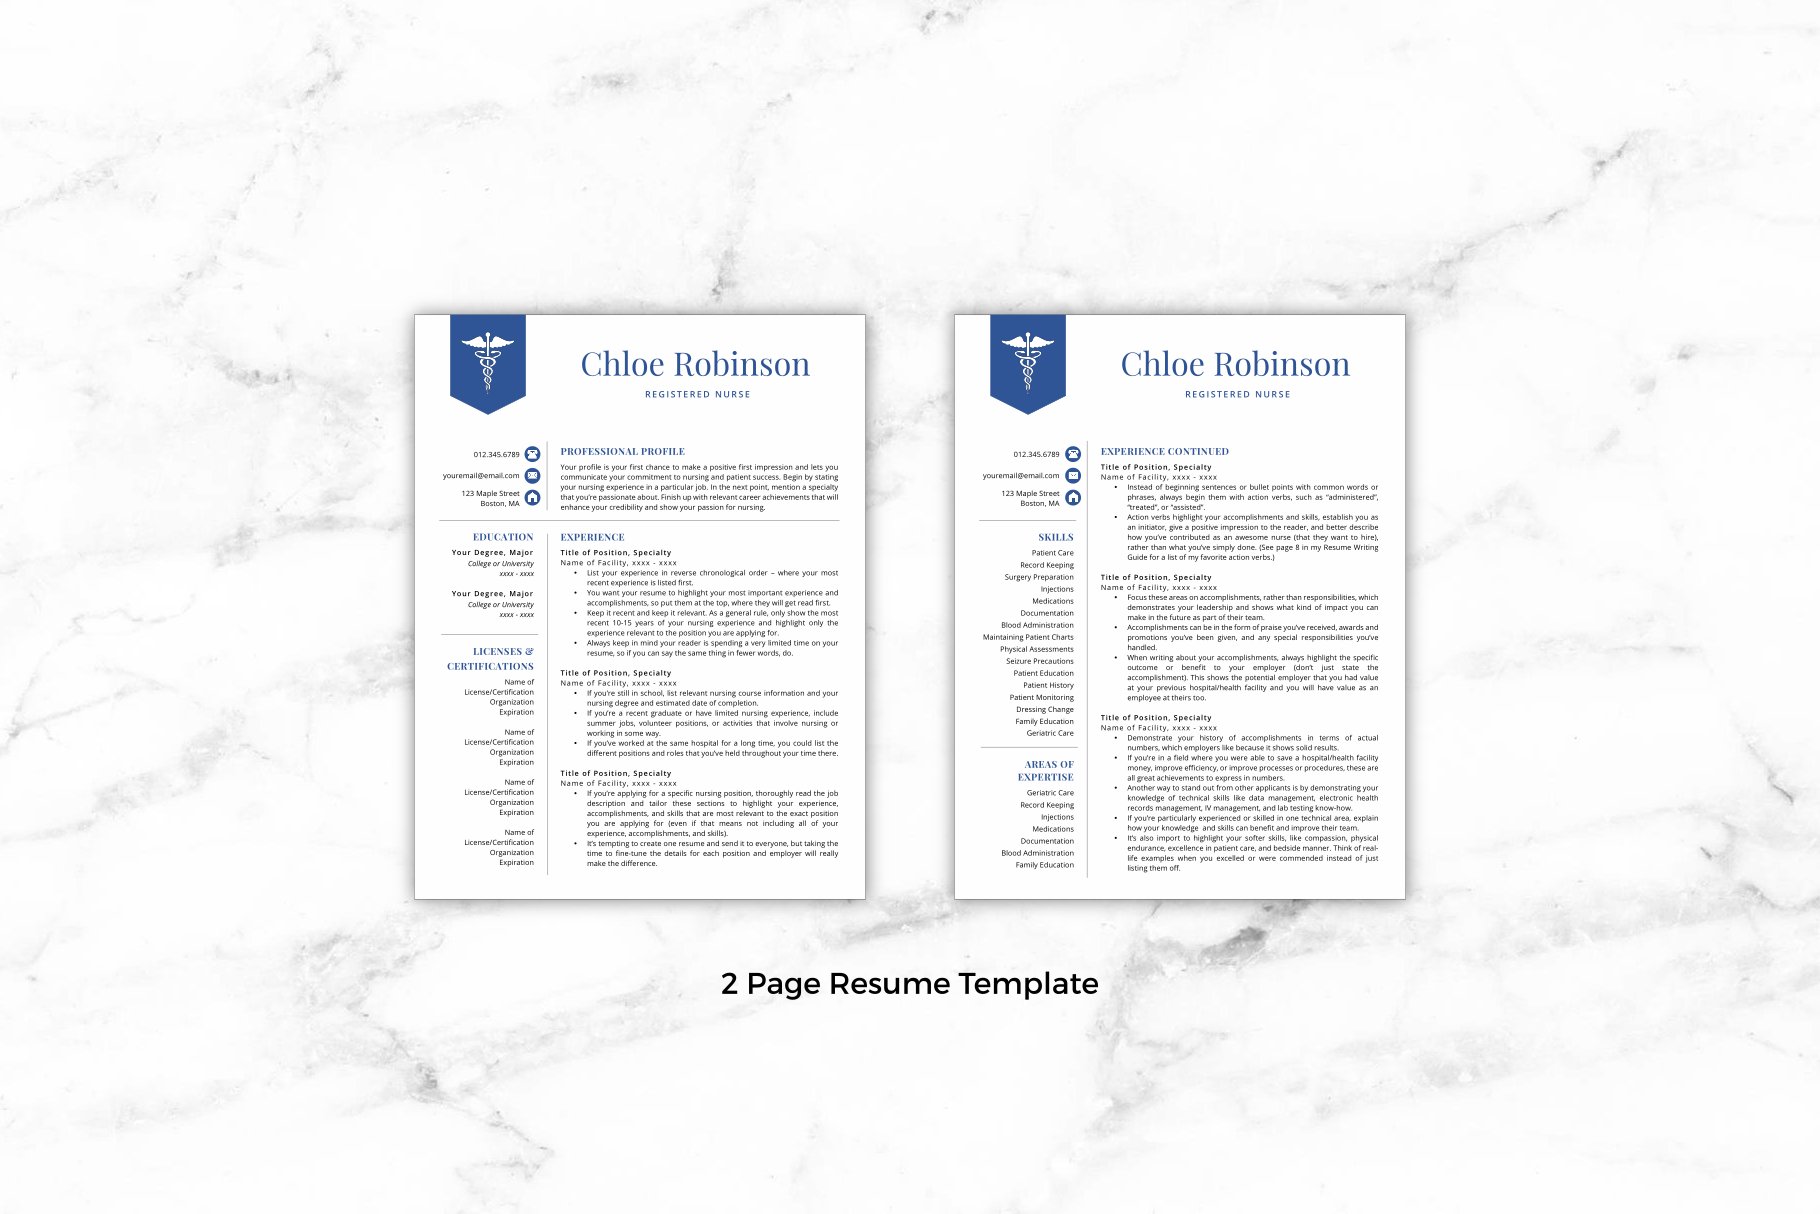 Two page resume template on a marble background.